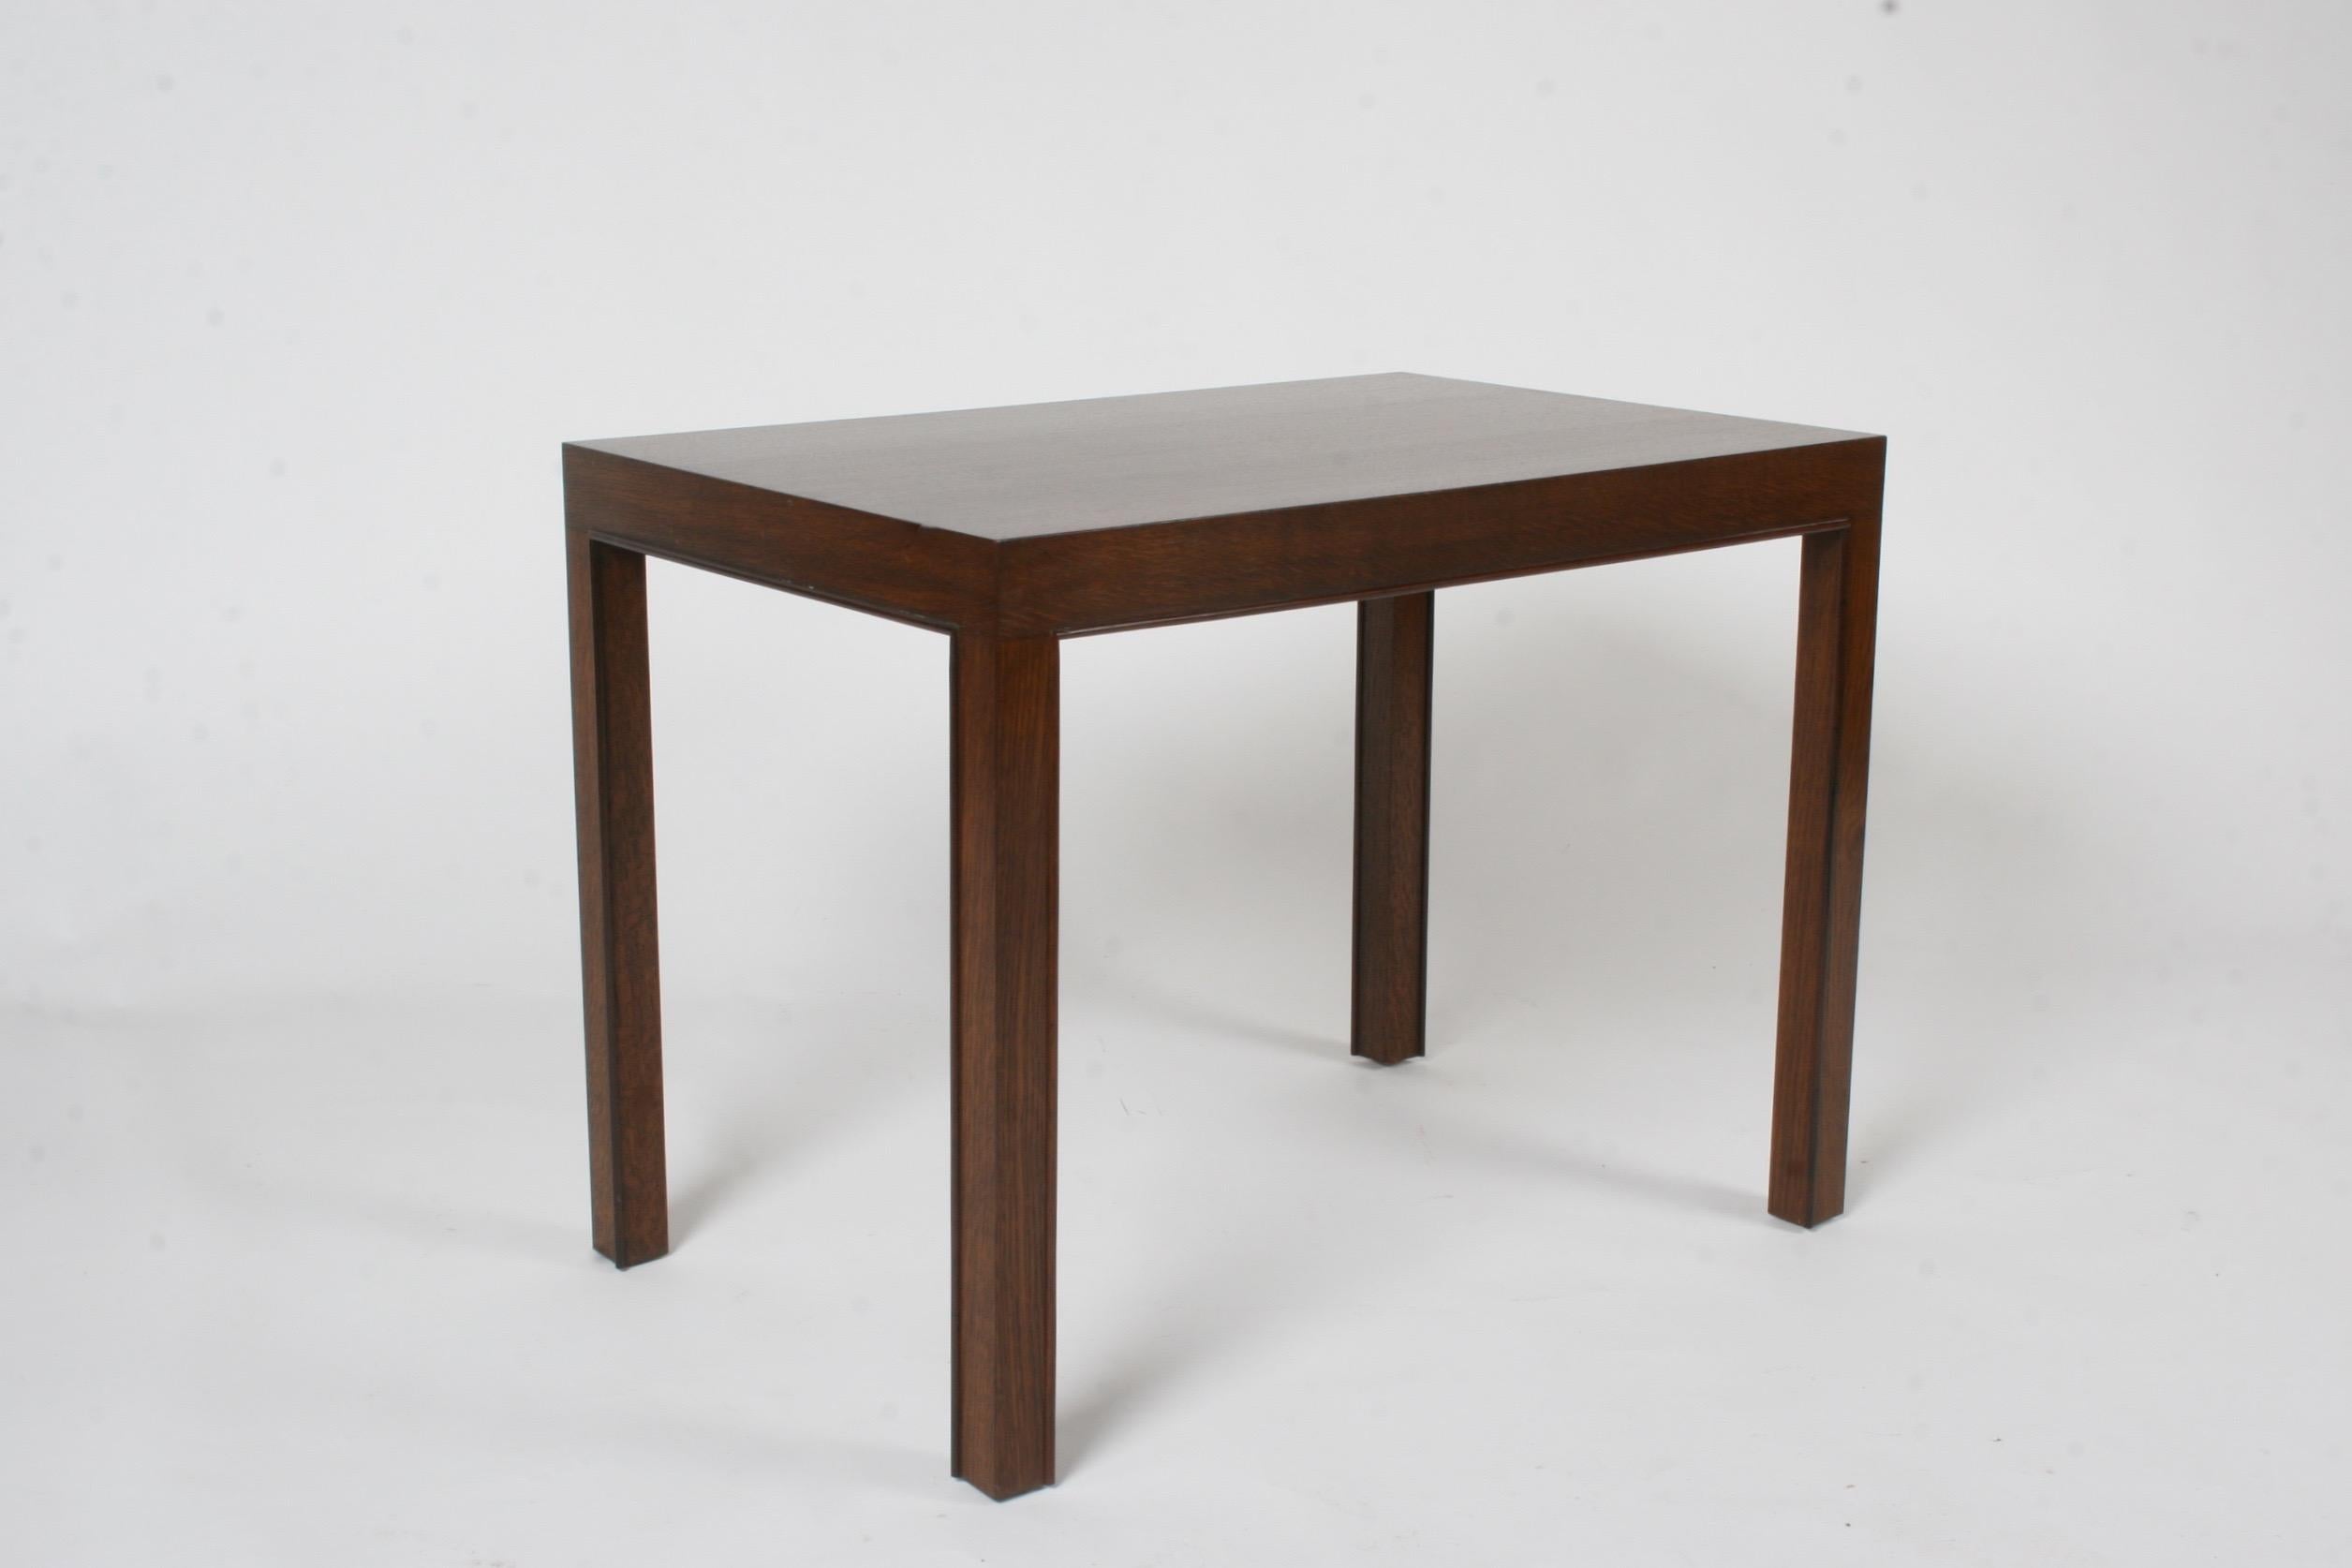 Mid-20th Century Edward Wormley Side Table with Rosewood Piped Edge